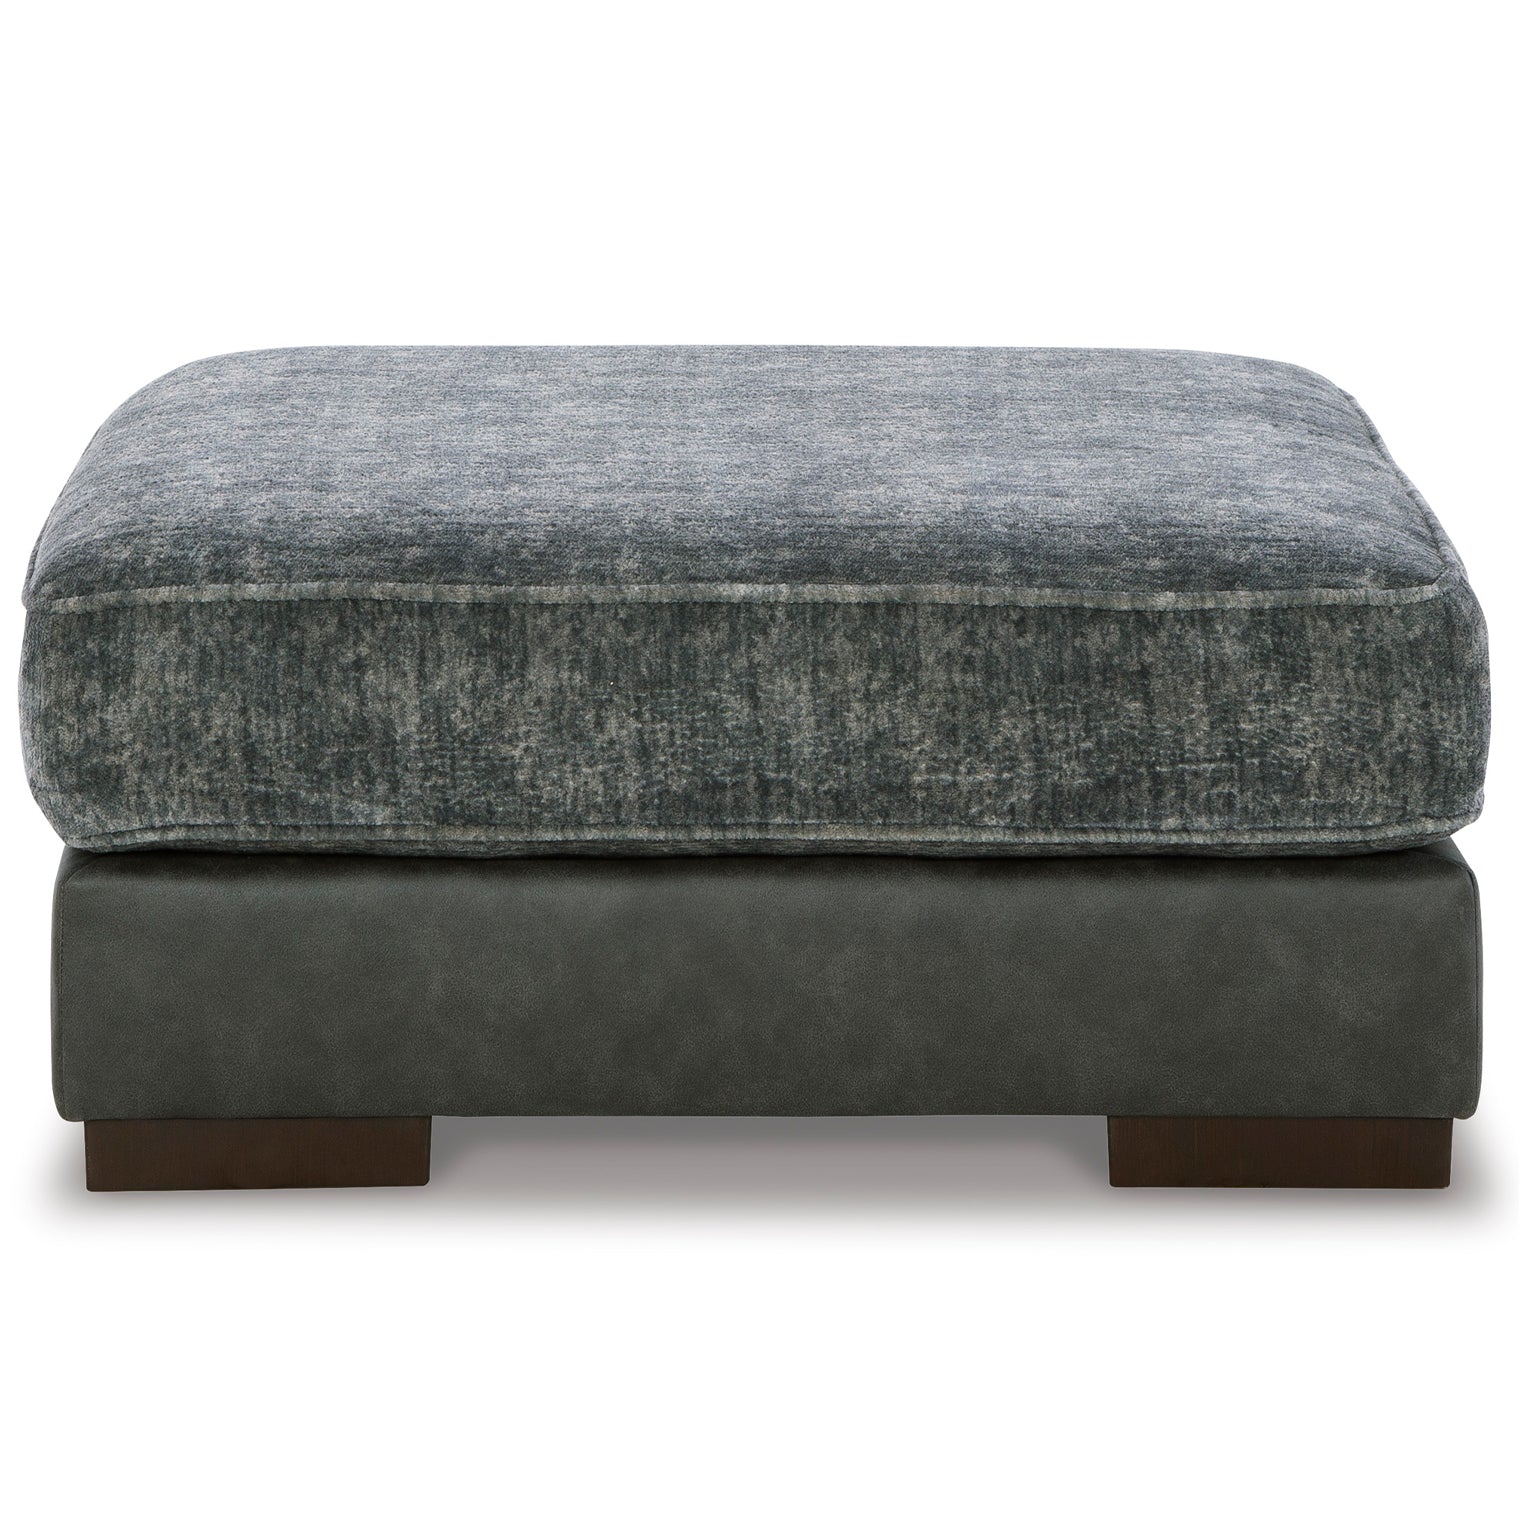 Larkstone Oversized Accent Ottoman in Pewter Color